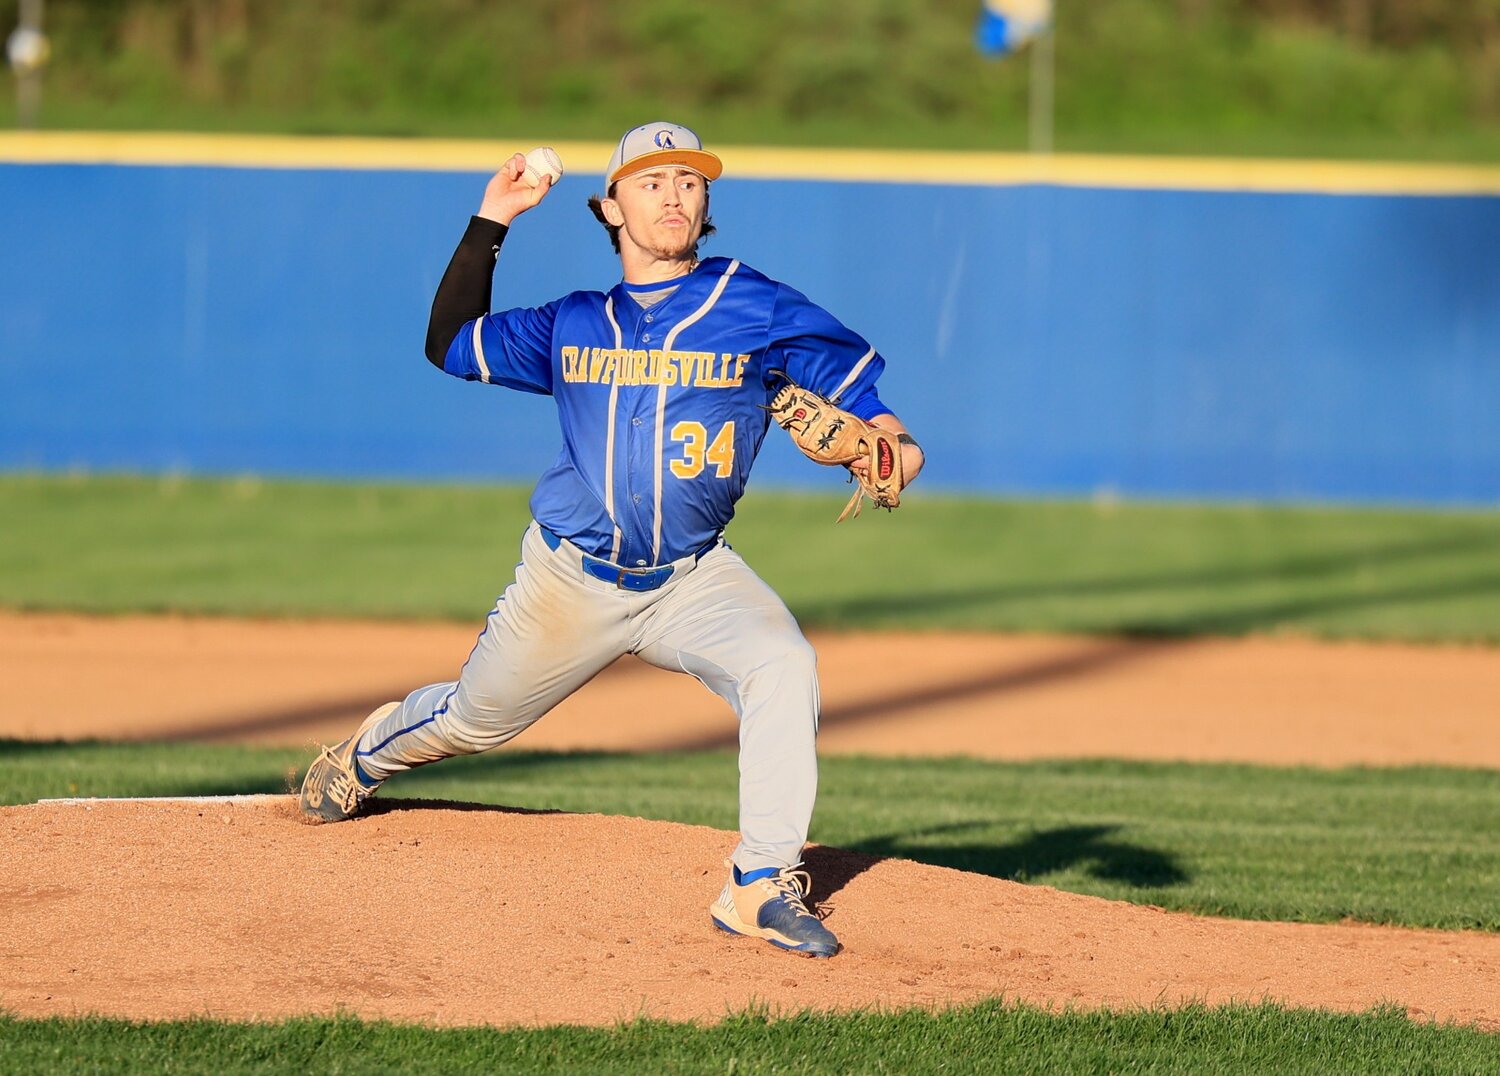 Senior Bryce Dowell picked up the win on the mound giving Crawfordsville six innings.